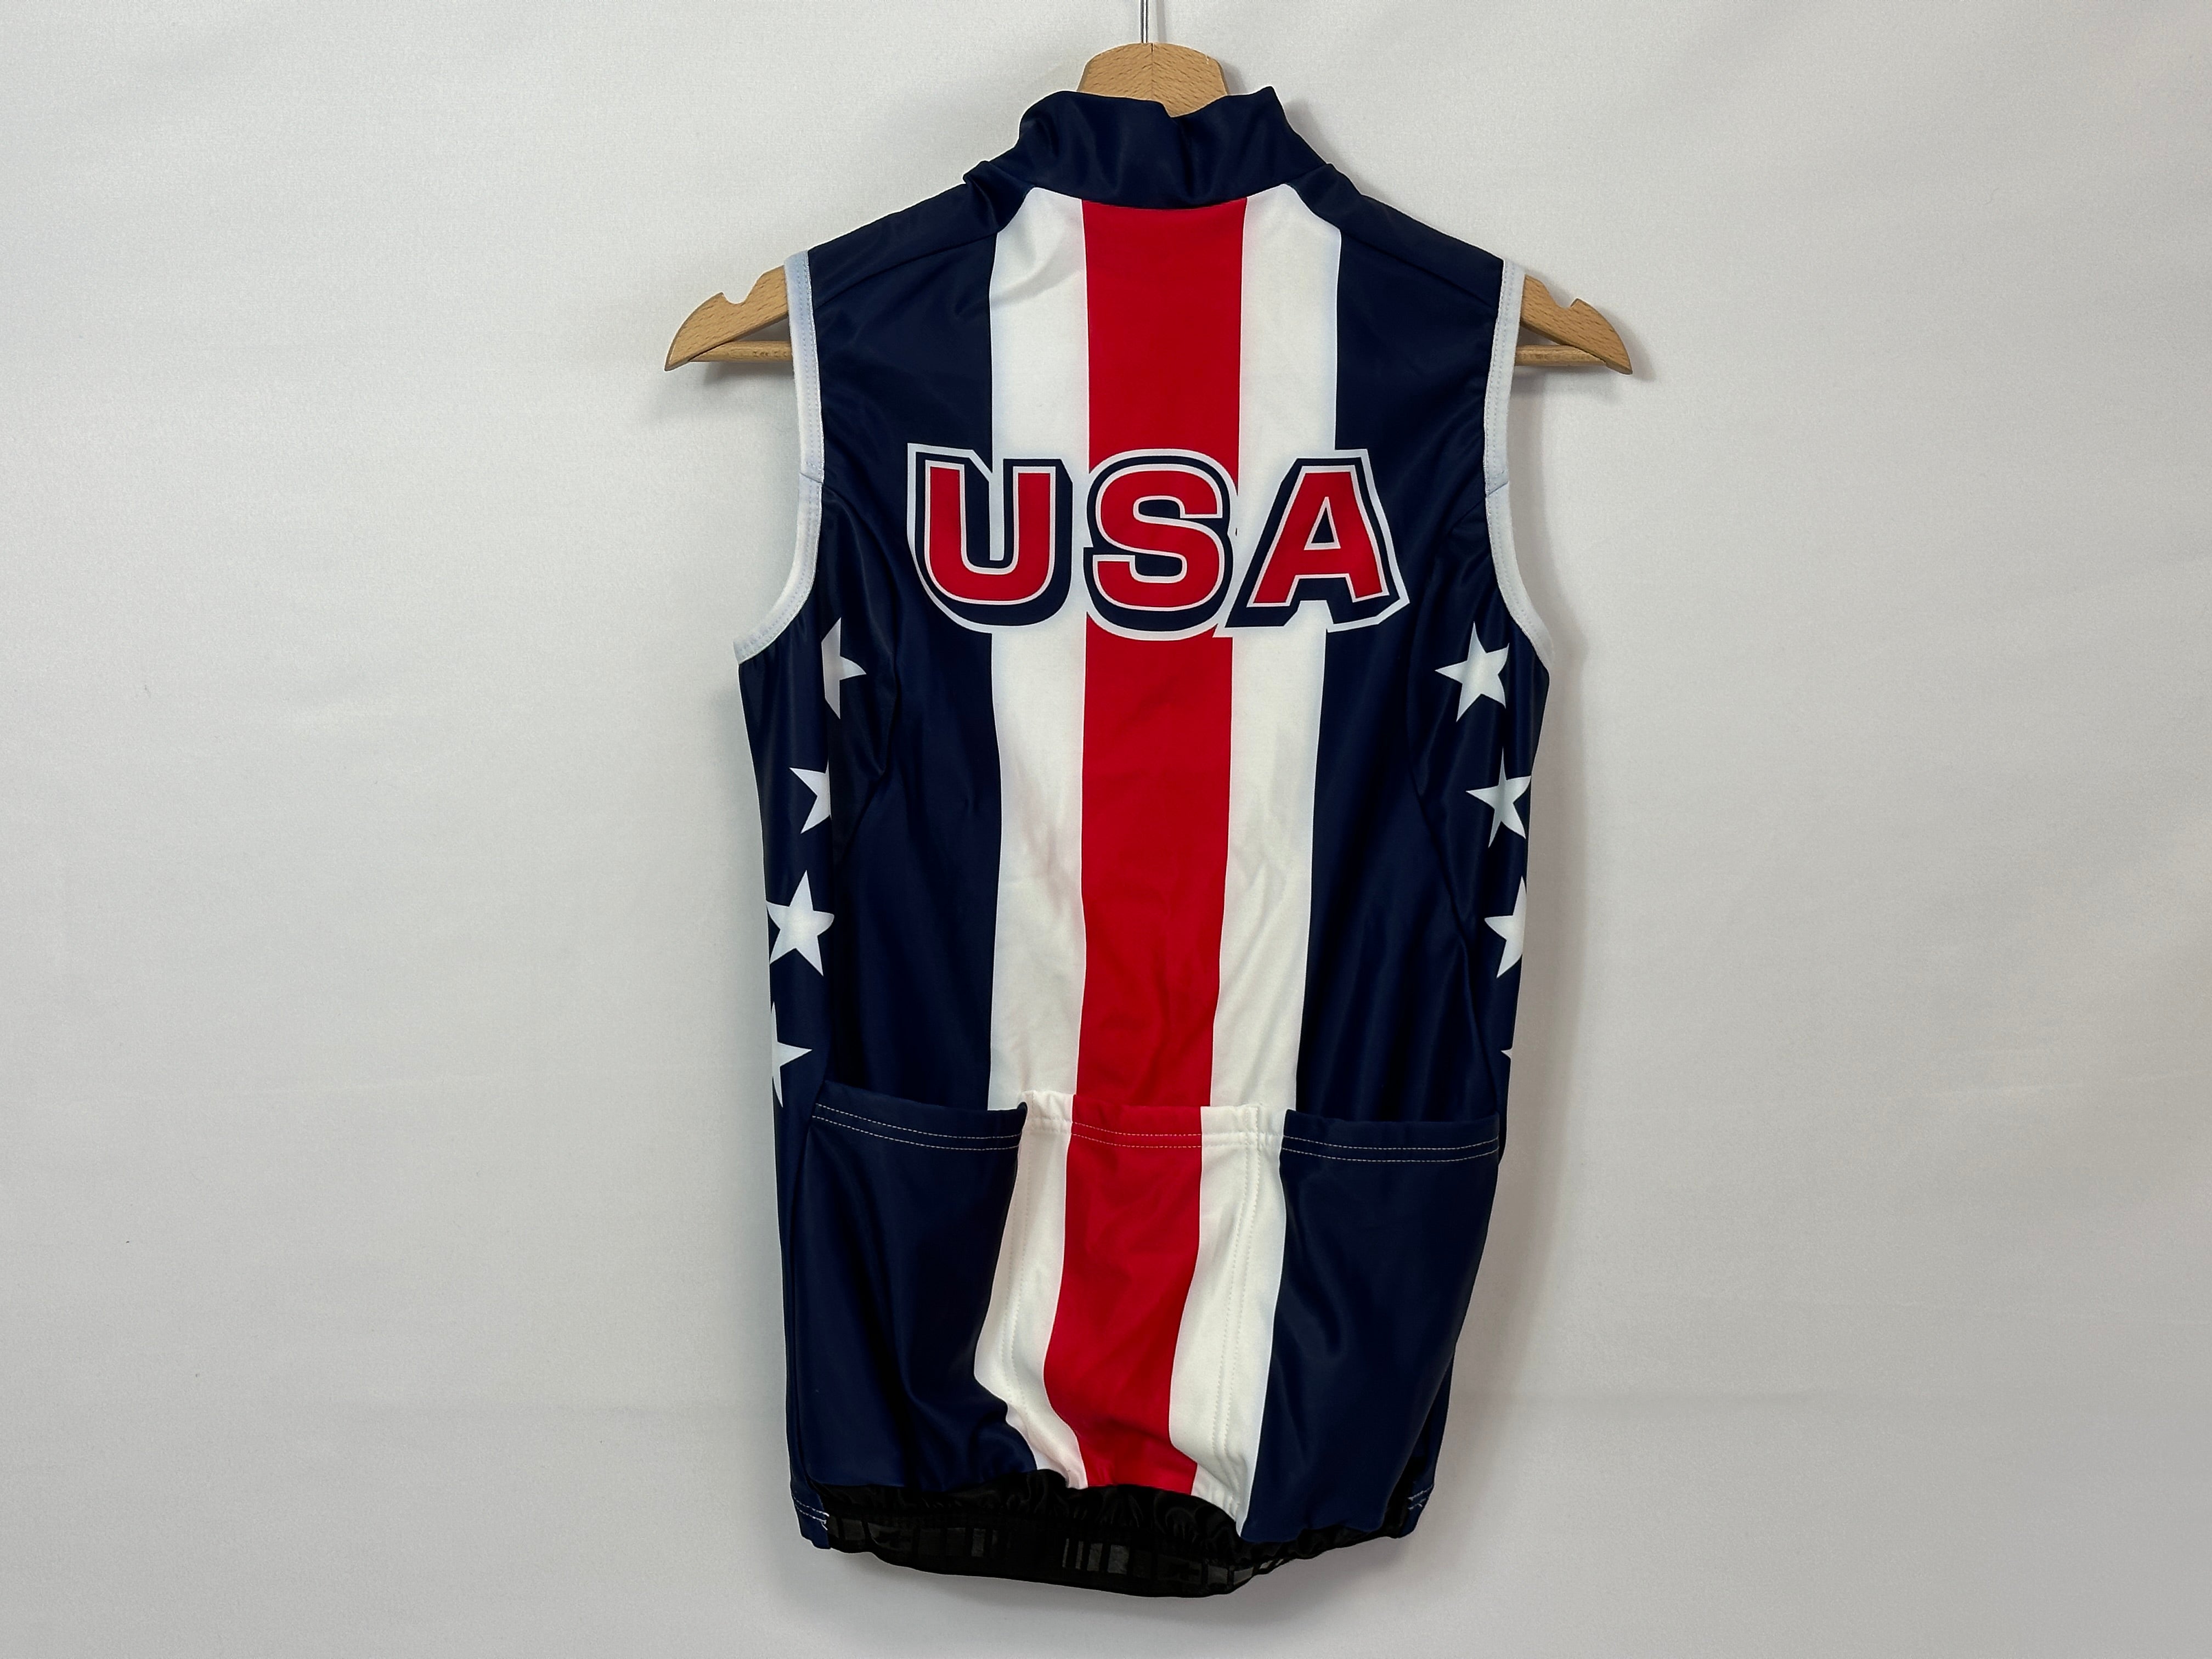 USA National Cycling Team - Thermal Vest by Assos